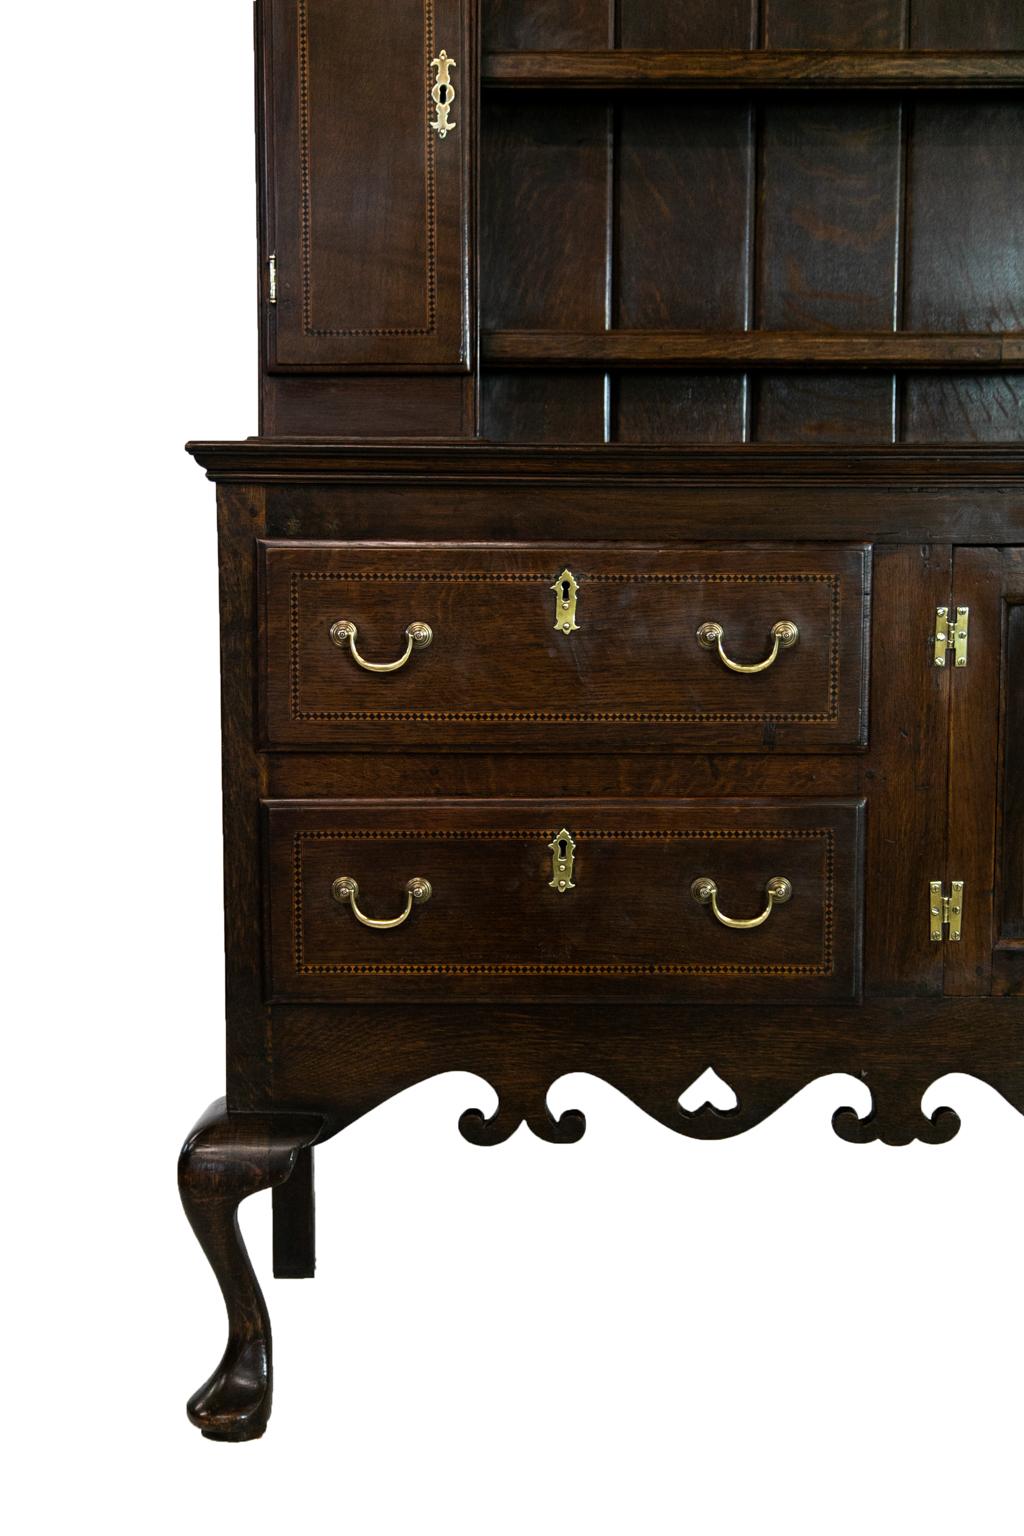 The cornice of this English oak Welsh dresser has a pierced apron. The top shelf is flanked by two arched openings that have scalloped shelves. The lower shelves of the top are flanked by inlaid cupboard doors. The lower section has two inlaid